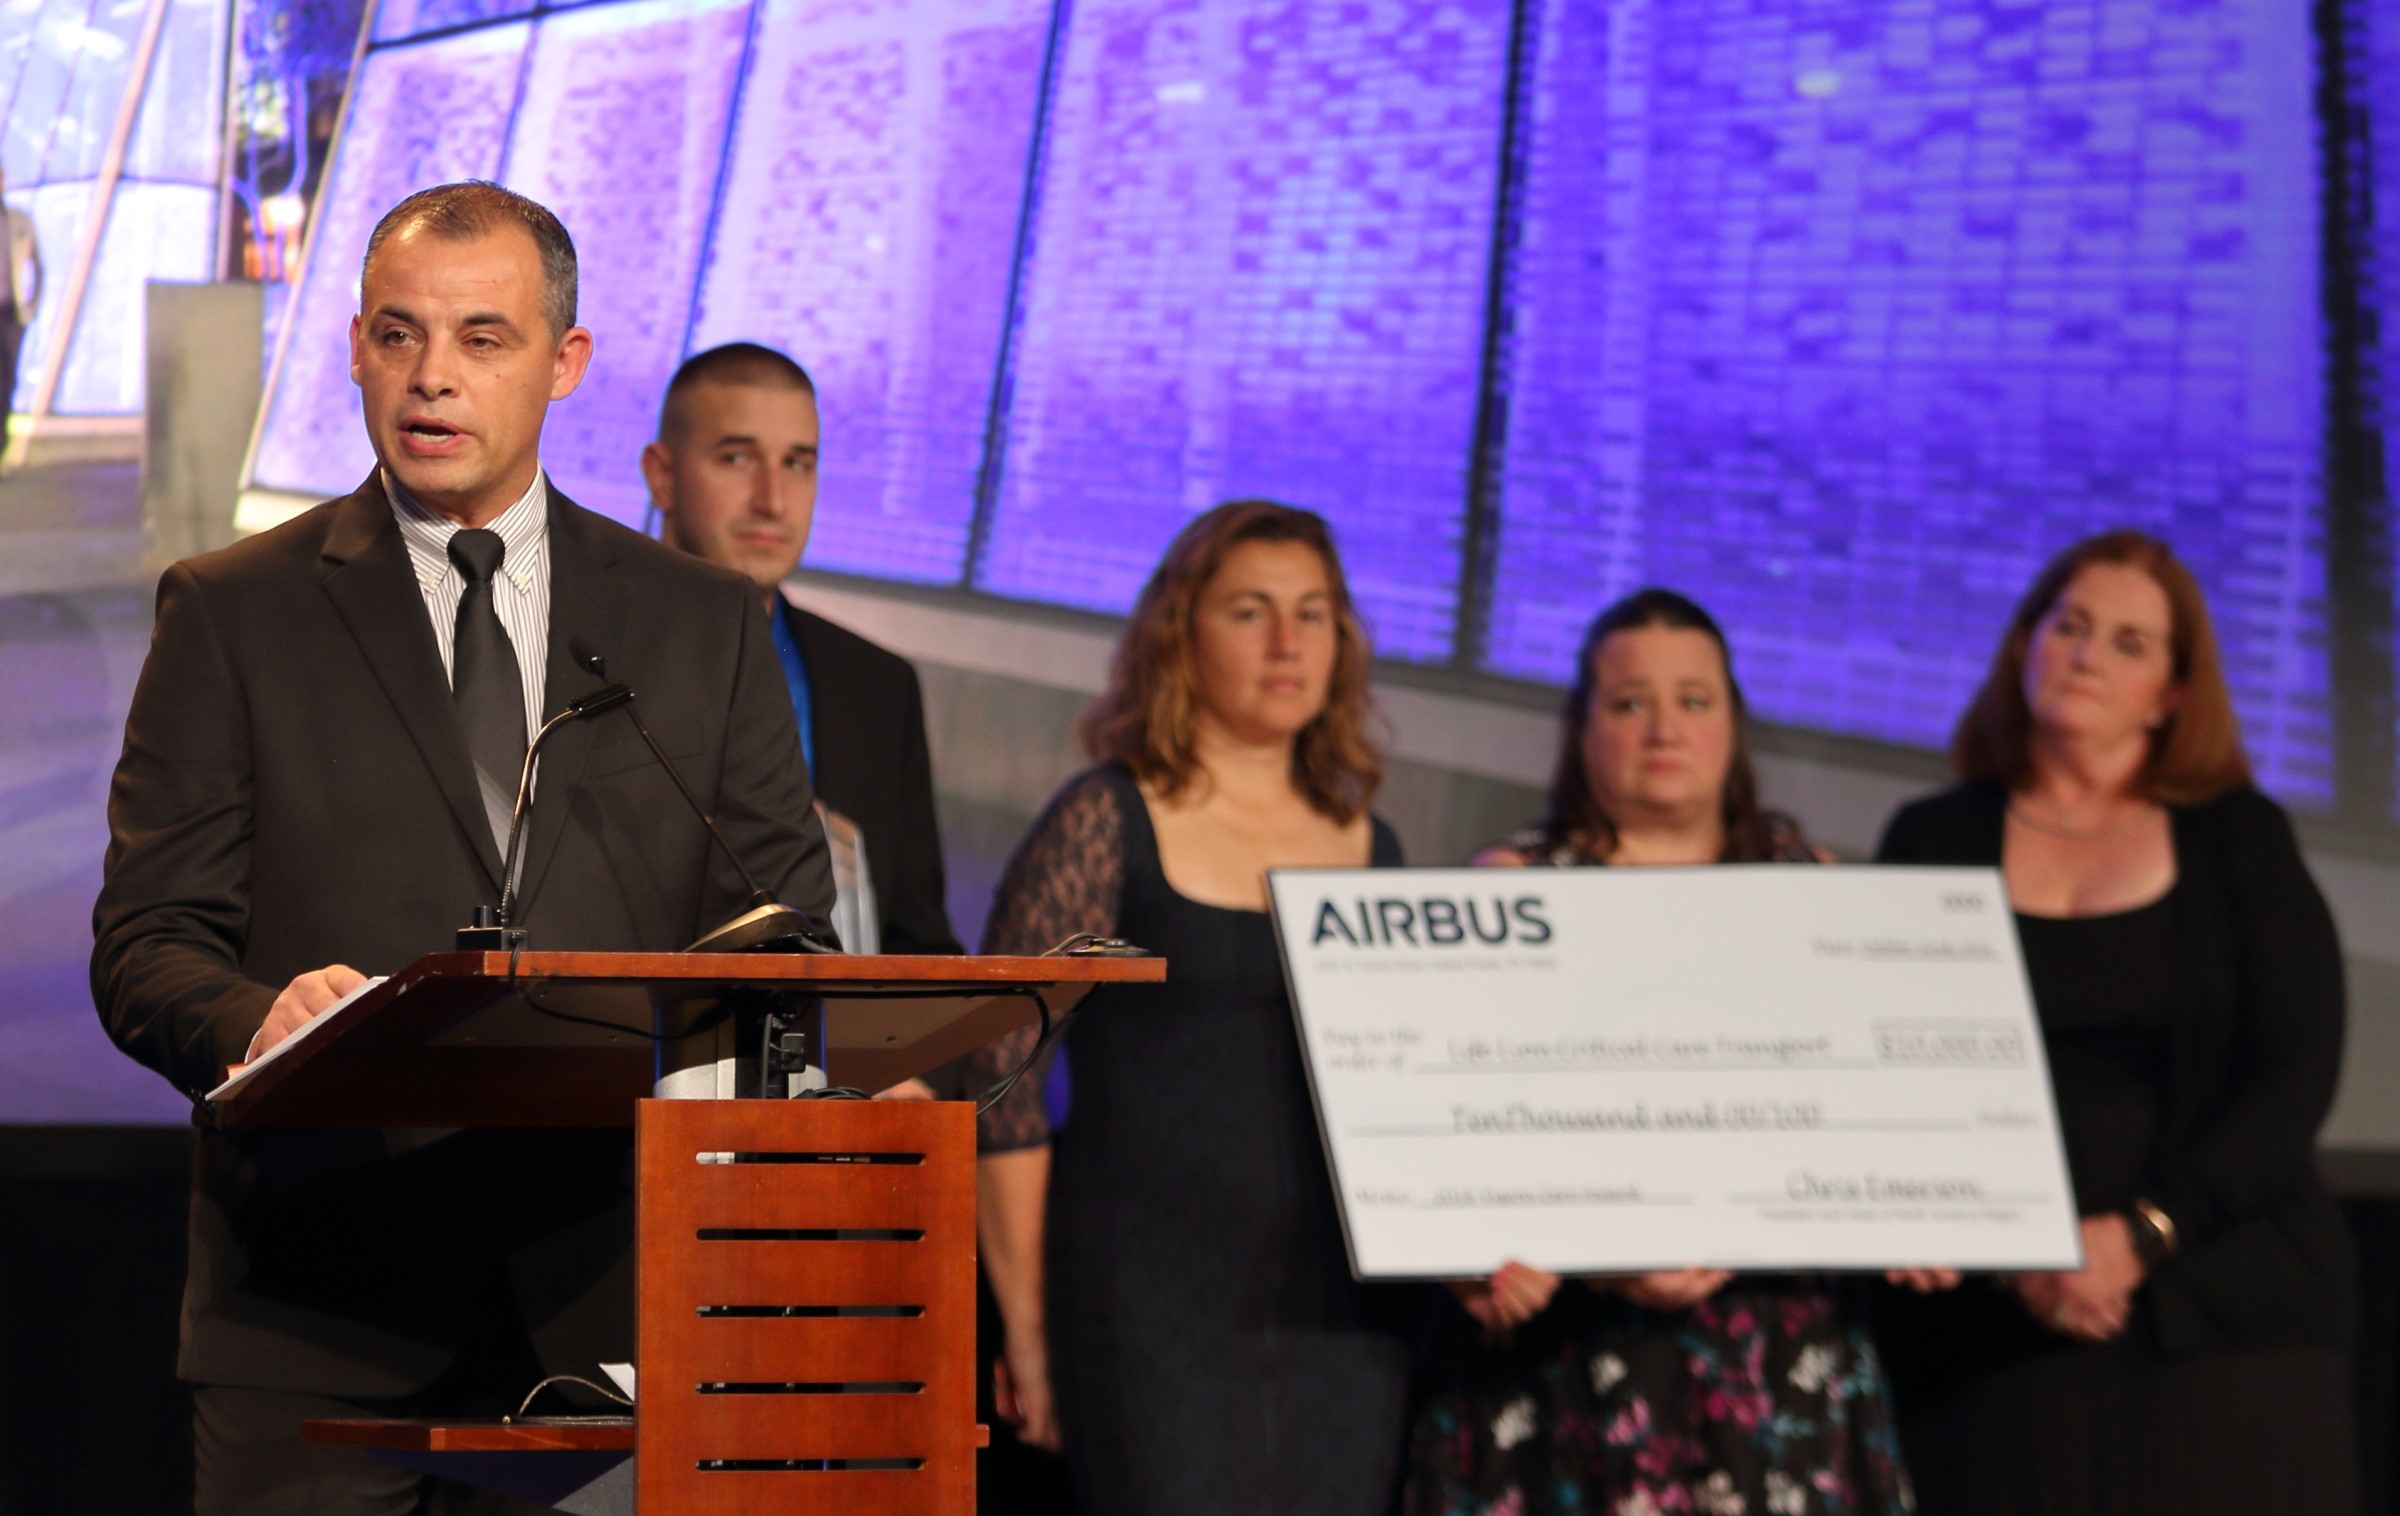 A man in a suit stands at a lectern speaking. Four people stand behind him holding an oversized cardboard check.